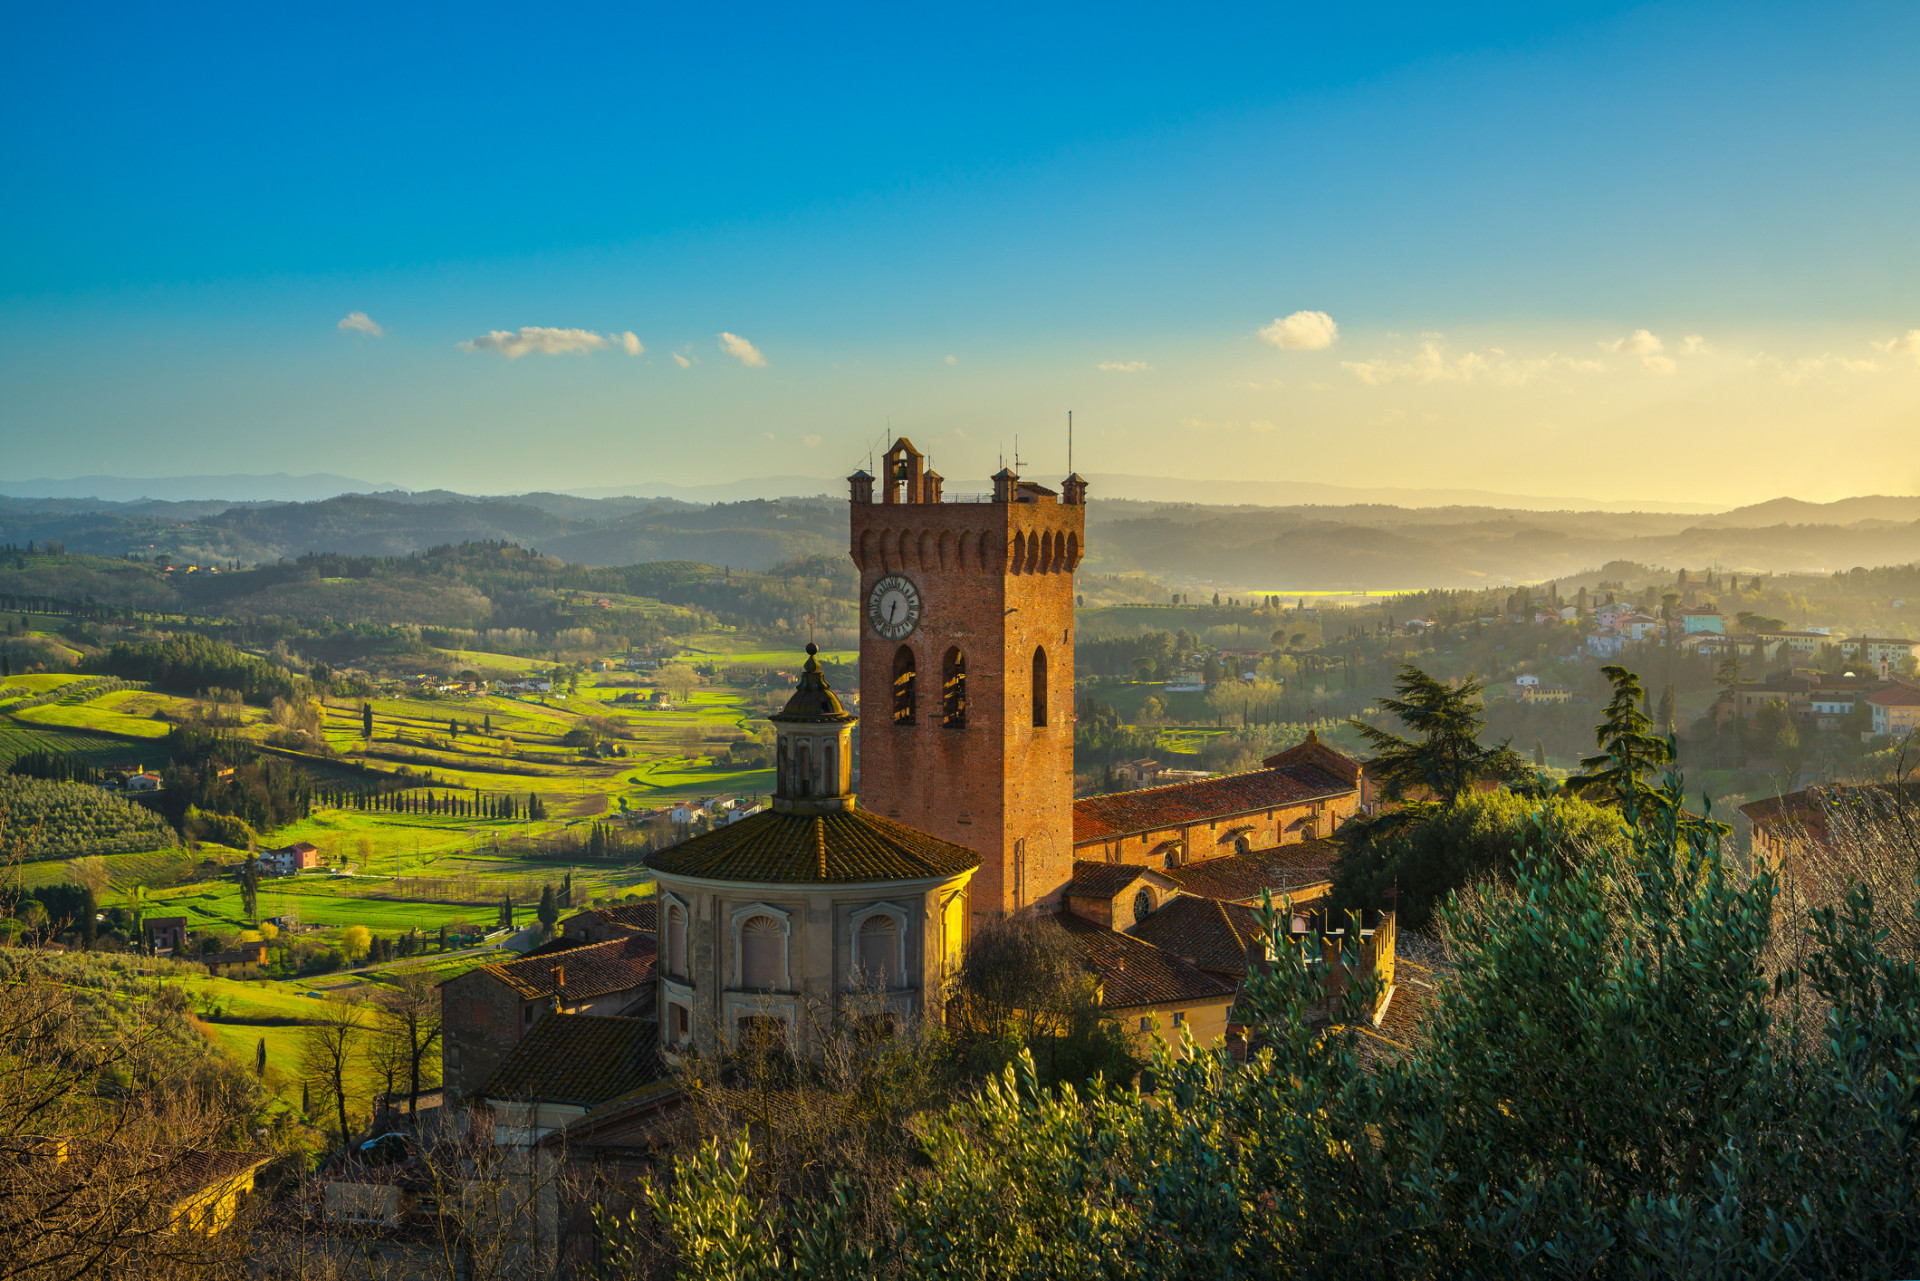 If you're looking for a solo getaway, consider walking along the Via Francigena, an ancient pilgrimage route that runs through much of Tuscany.<p>You may also like:<a href="https://www.starsinsider.com/n/266280?utm_source=msn.com&utm_medium=display&utm_campaign=referral_description&utm_content=284295v5en-nz"> Controversial celebrity scandals that shocked the world</a></p>